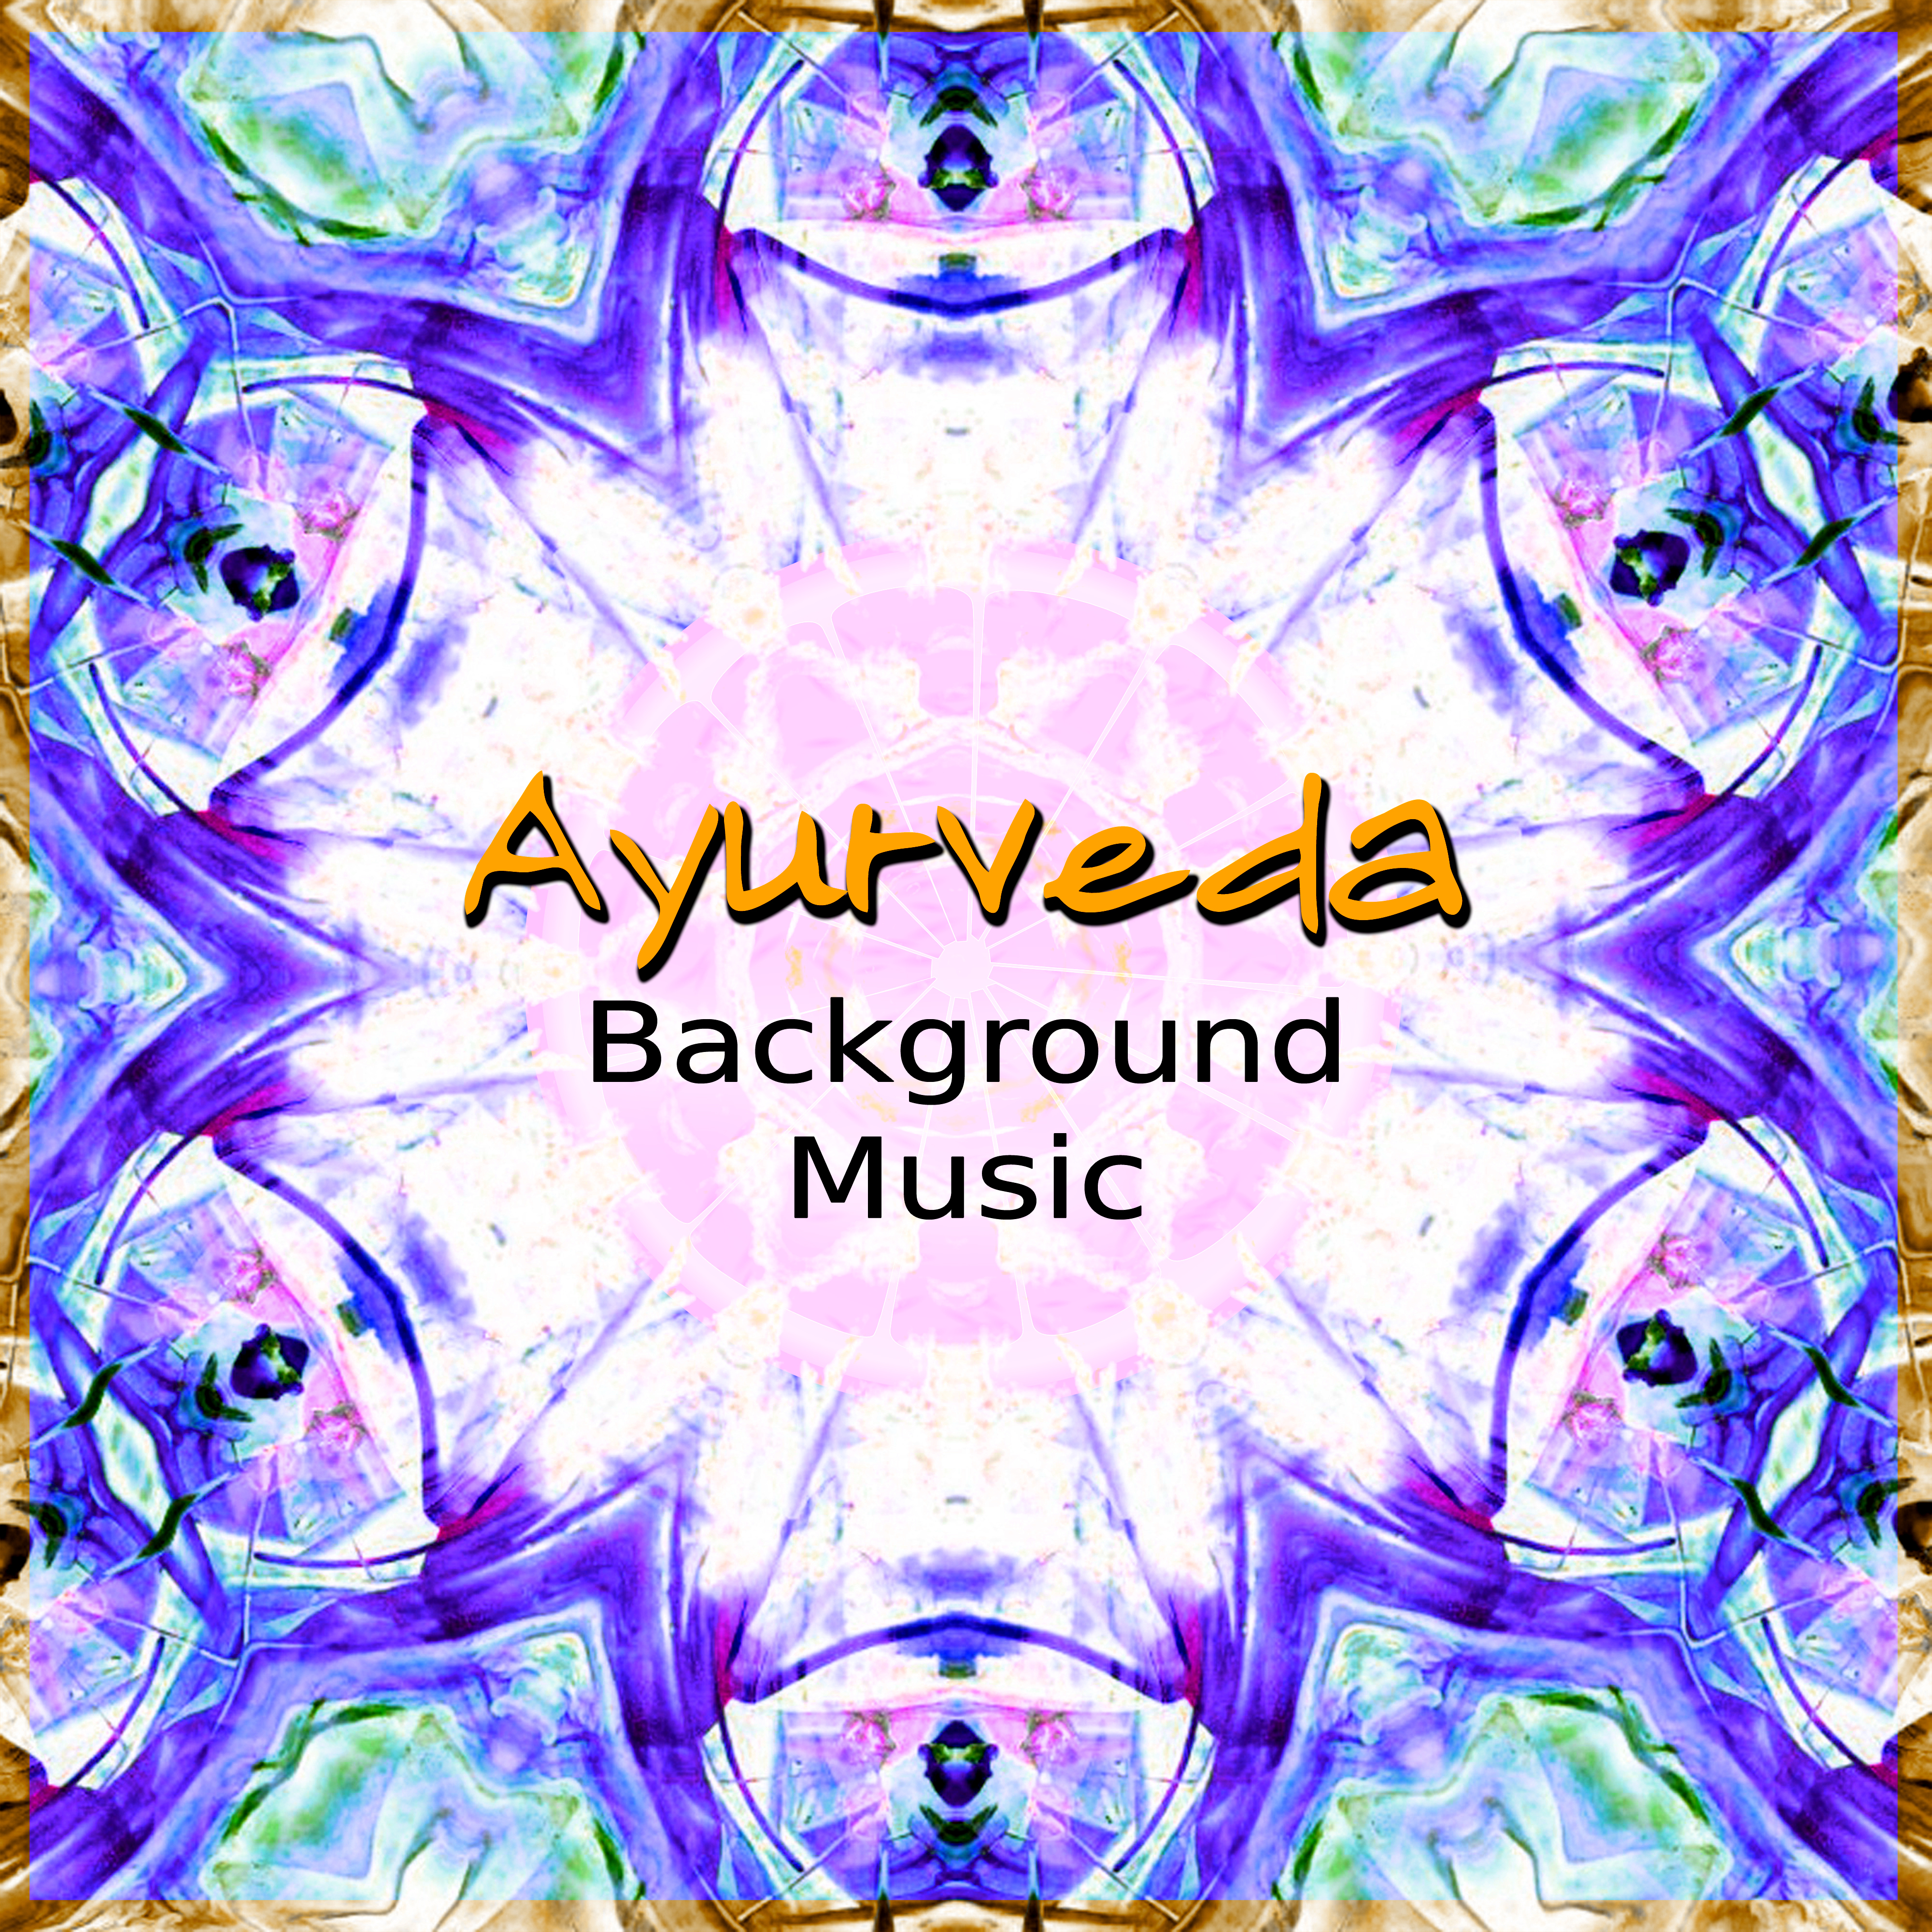 Ayurveda Background Music  Natural White Noise and Nature Sounds for Relaxation  Meditation, Calm Music to Relax  Sleep  Heal